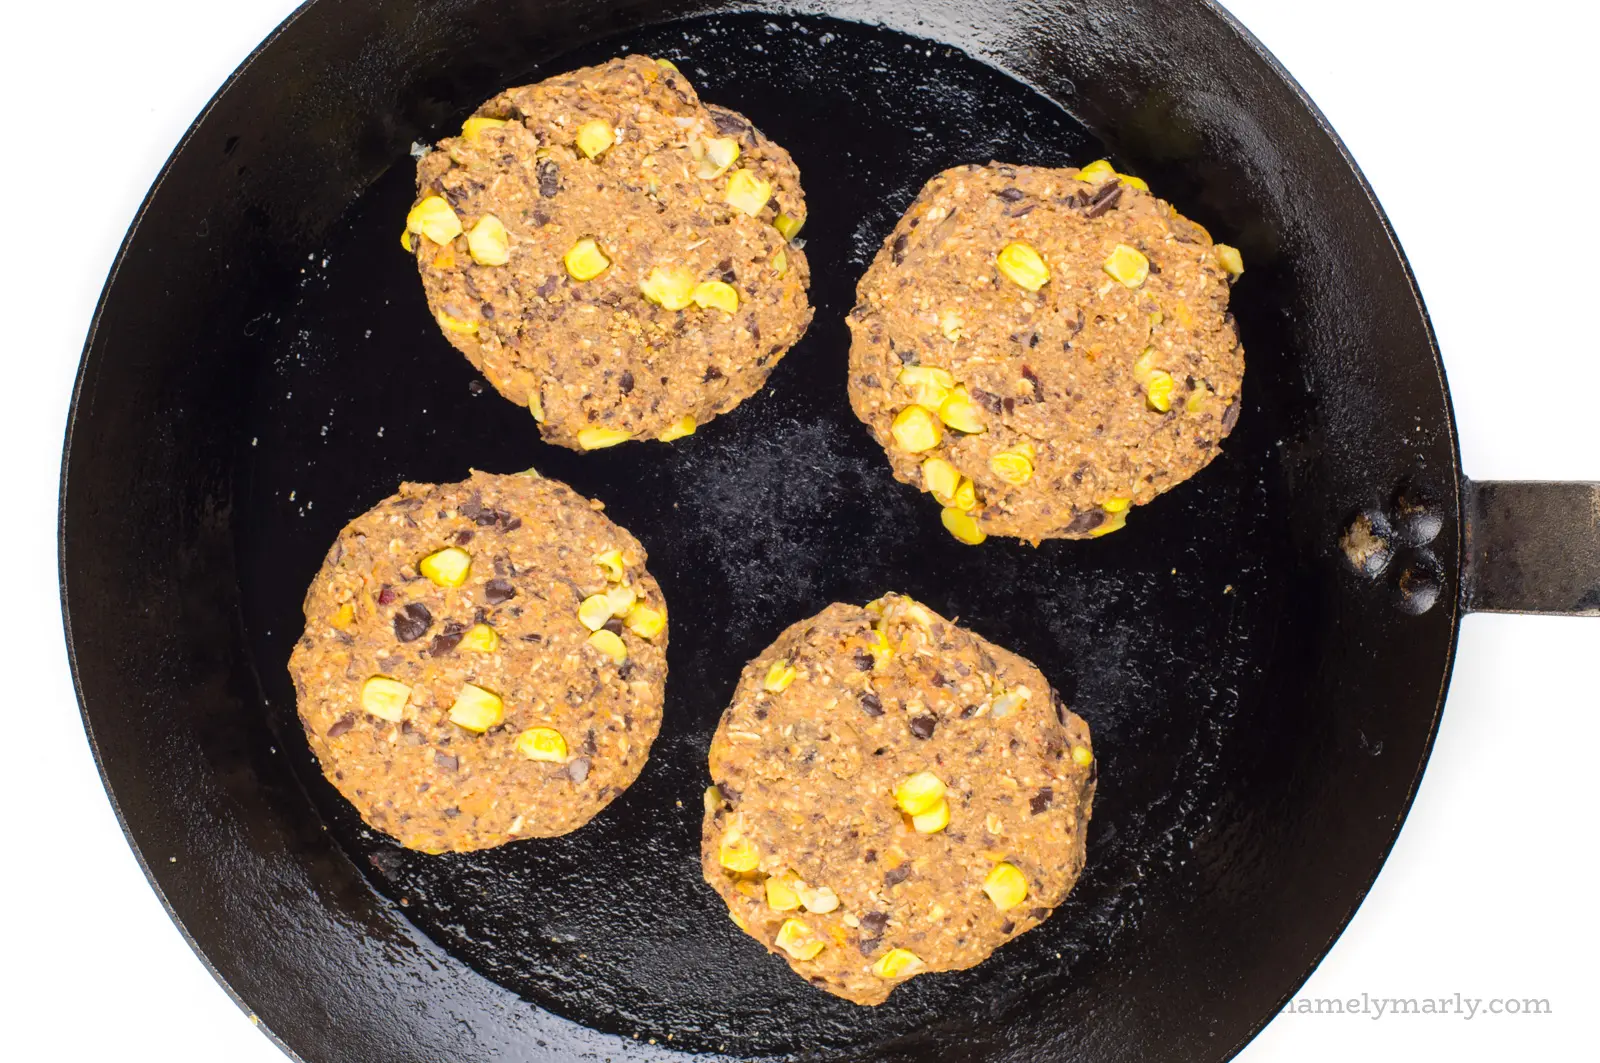 Black bean burger patties with fresh corn are cooking on a skillet.